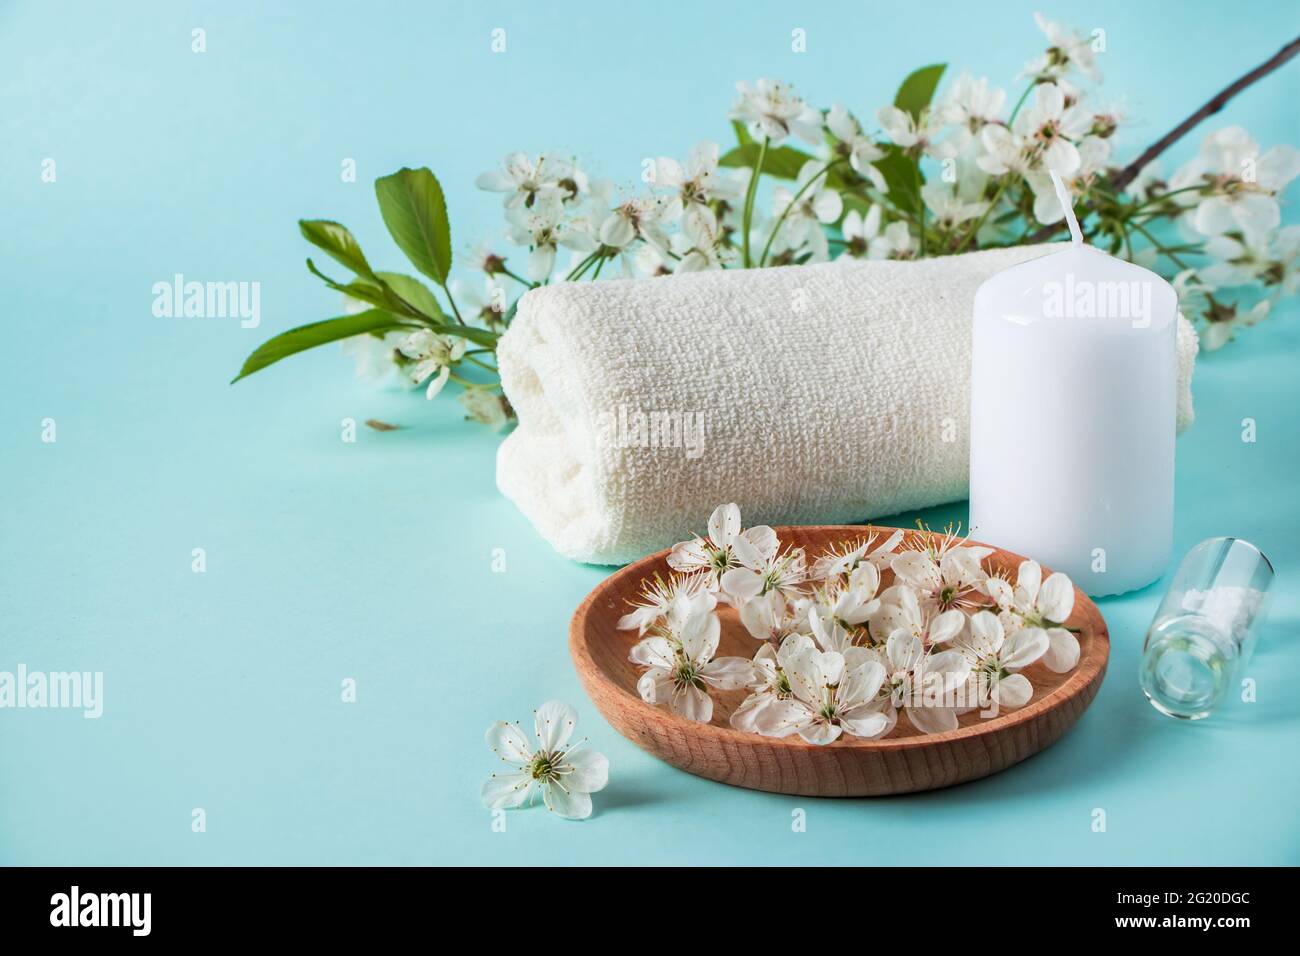 Natural organic beauty products for spa and aromatherapy. Aromatic essential oil, candles and a towel on a blue background. Relaxation concept, place Stock Photo